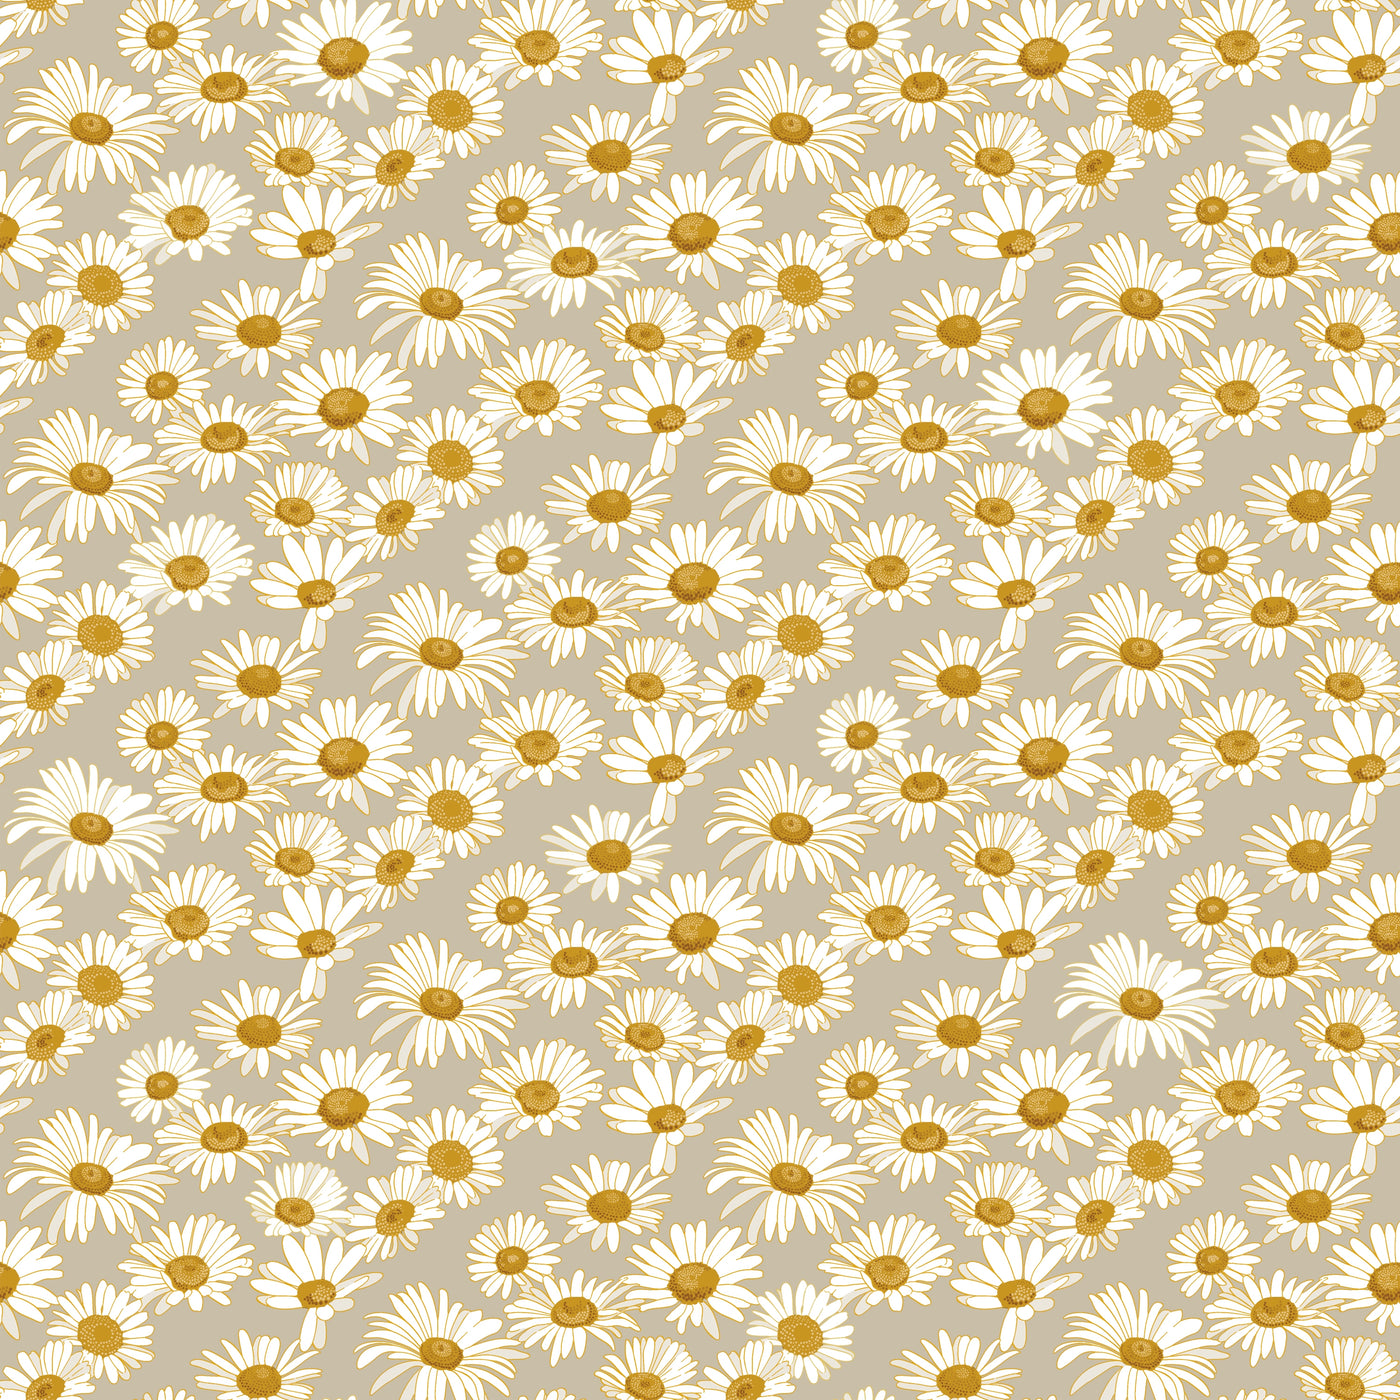 An up close swatch of Tempaper's Daisies Peel And Stick Wallpaper By Novogratz.